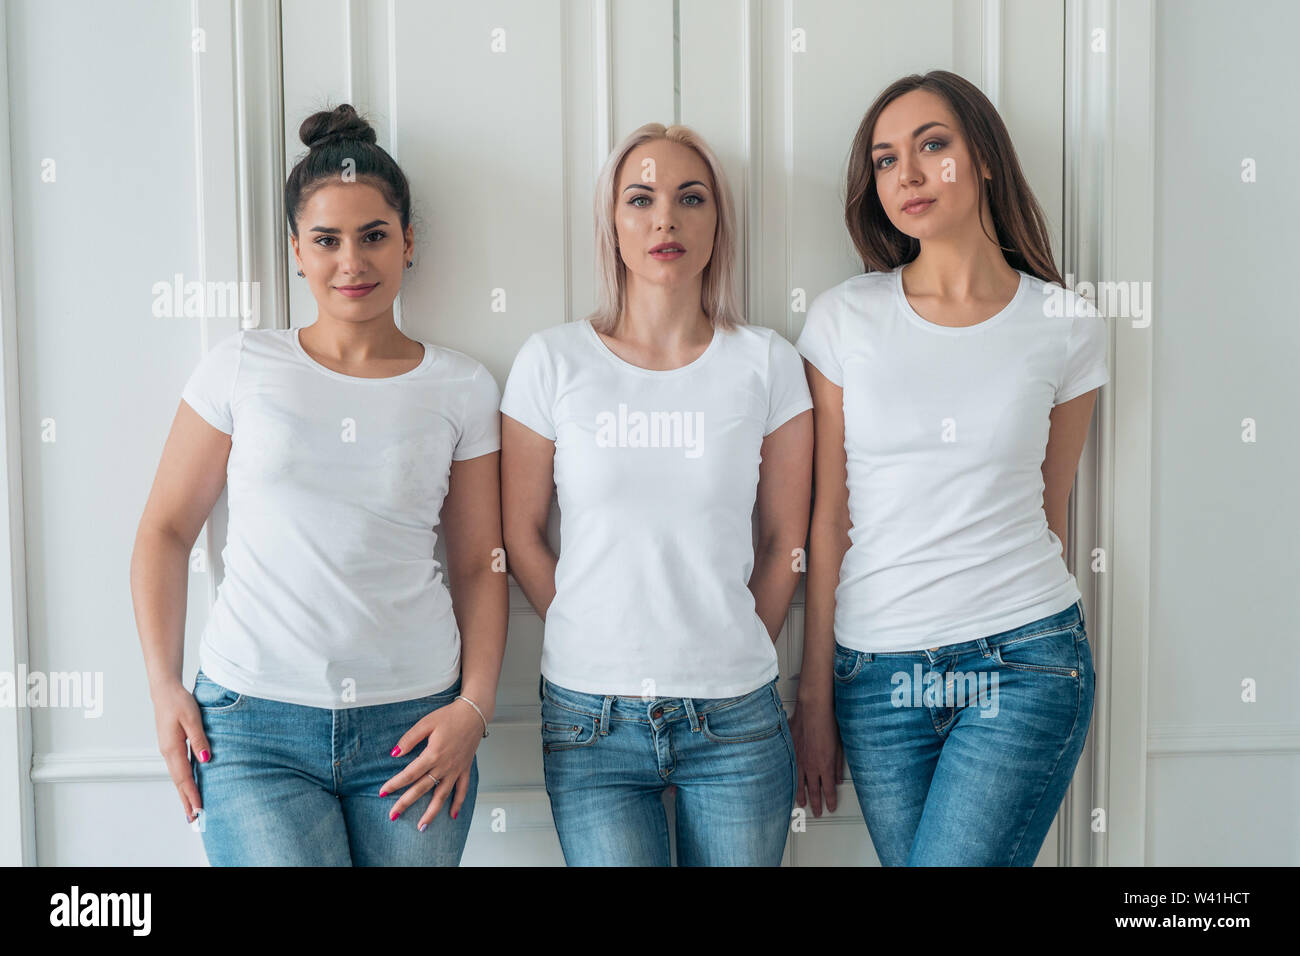 Three beautiful girls models posing in white T-shirts and blue jeans. Layout for design on t-shirts Stock Photo